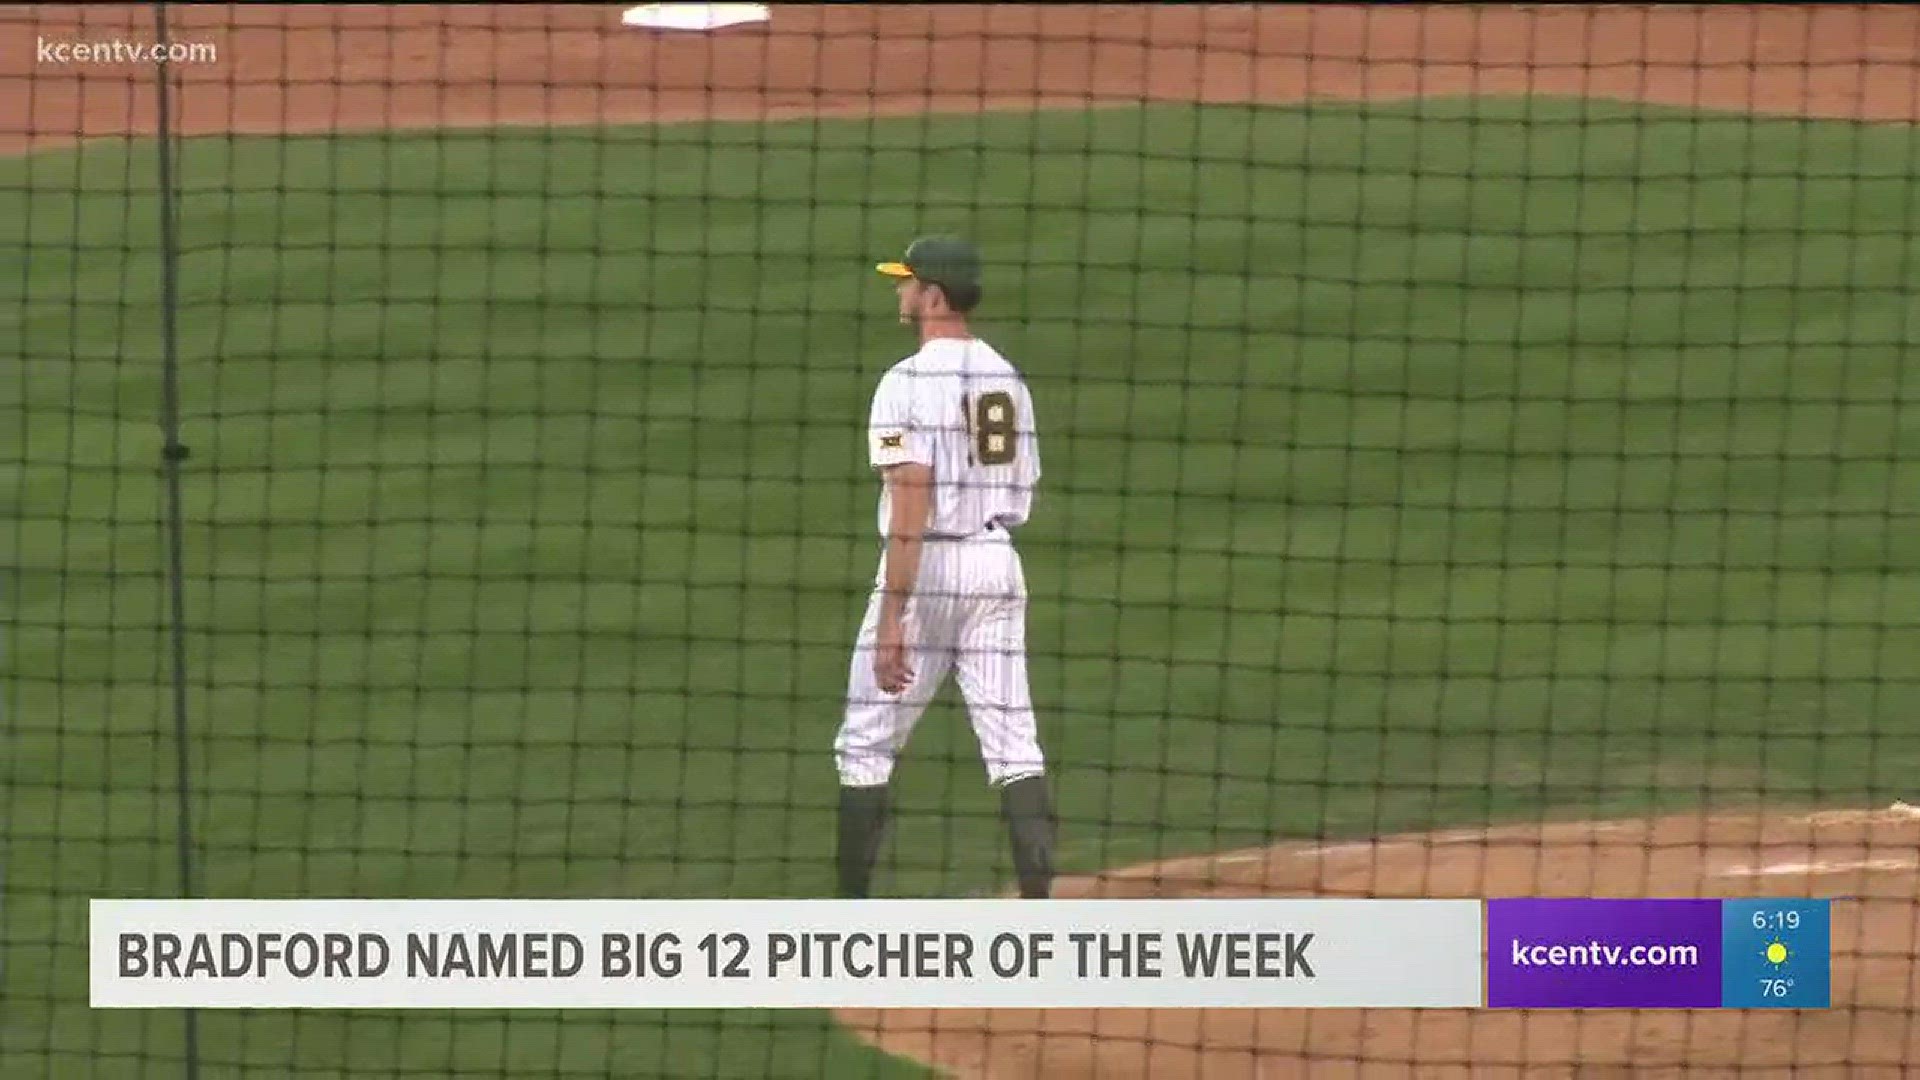 Cody Bradford was named Big 12 Pitcher of the Week.